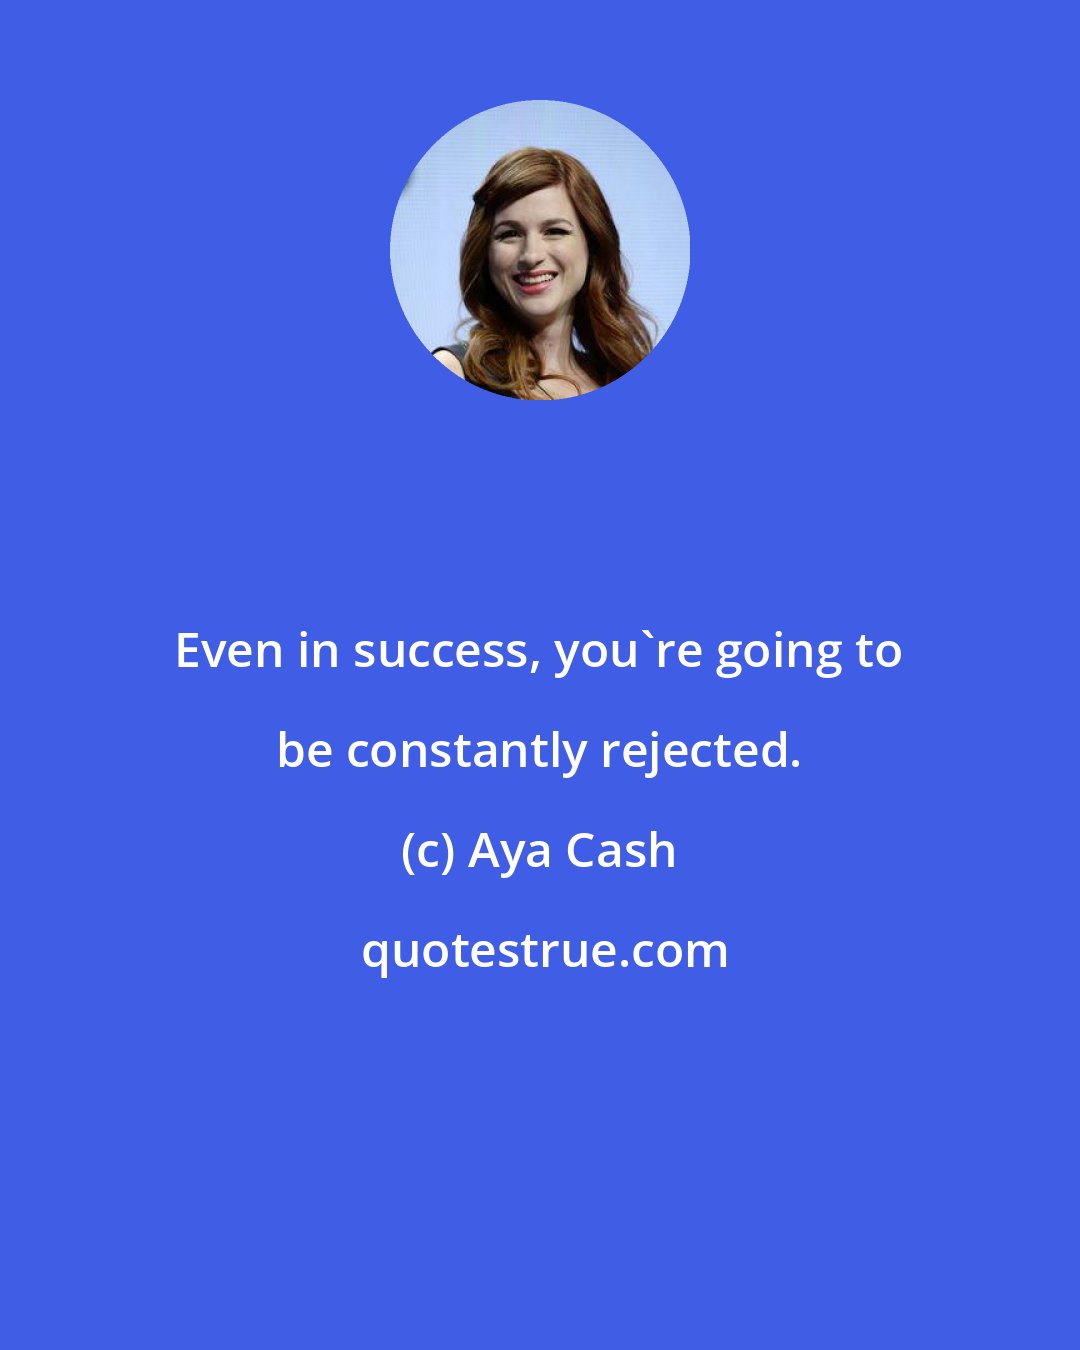 Aya Cash: Even in success, you're going to be constantly rejected.